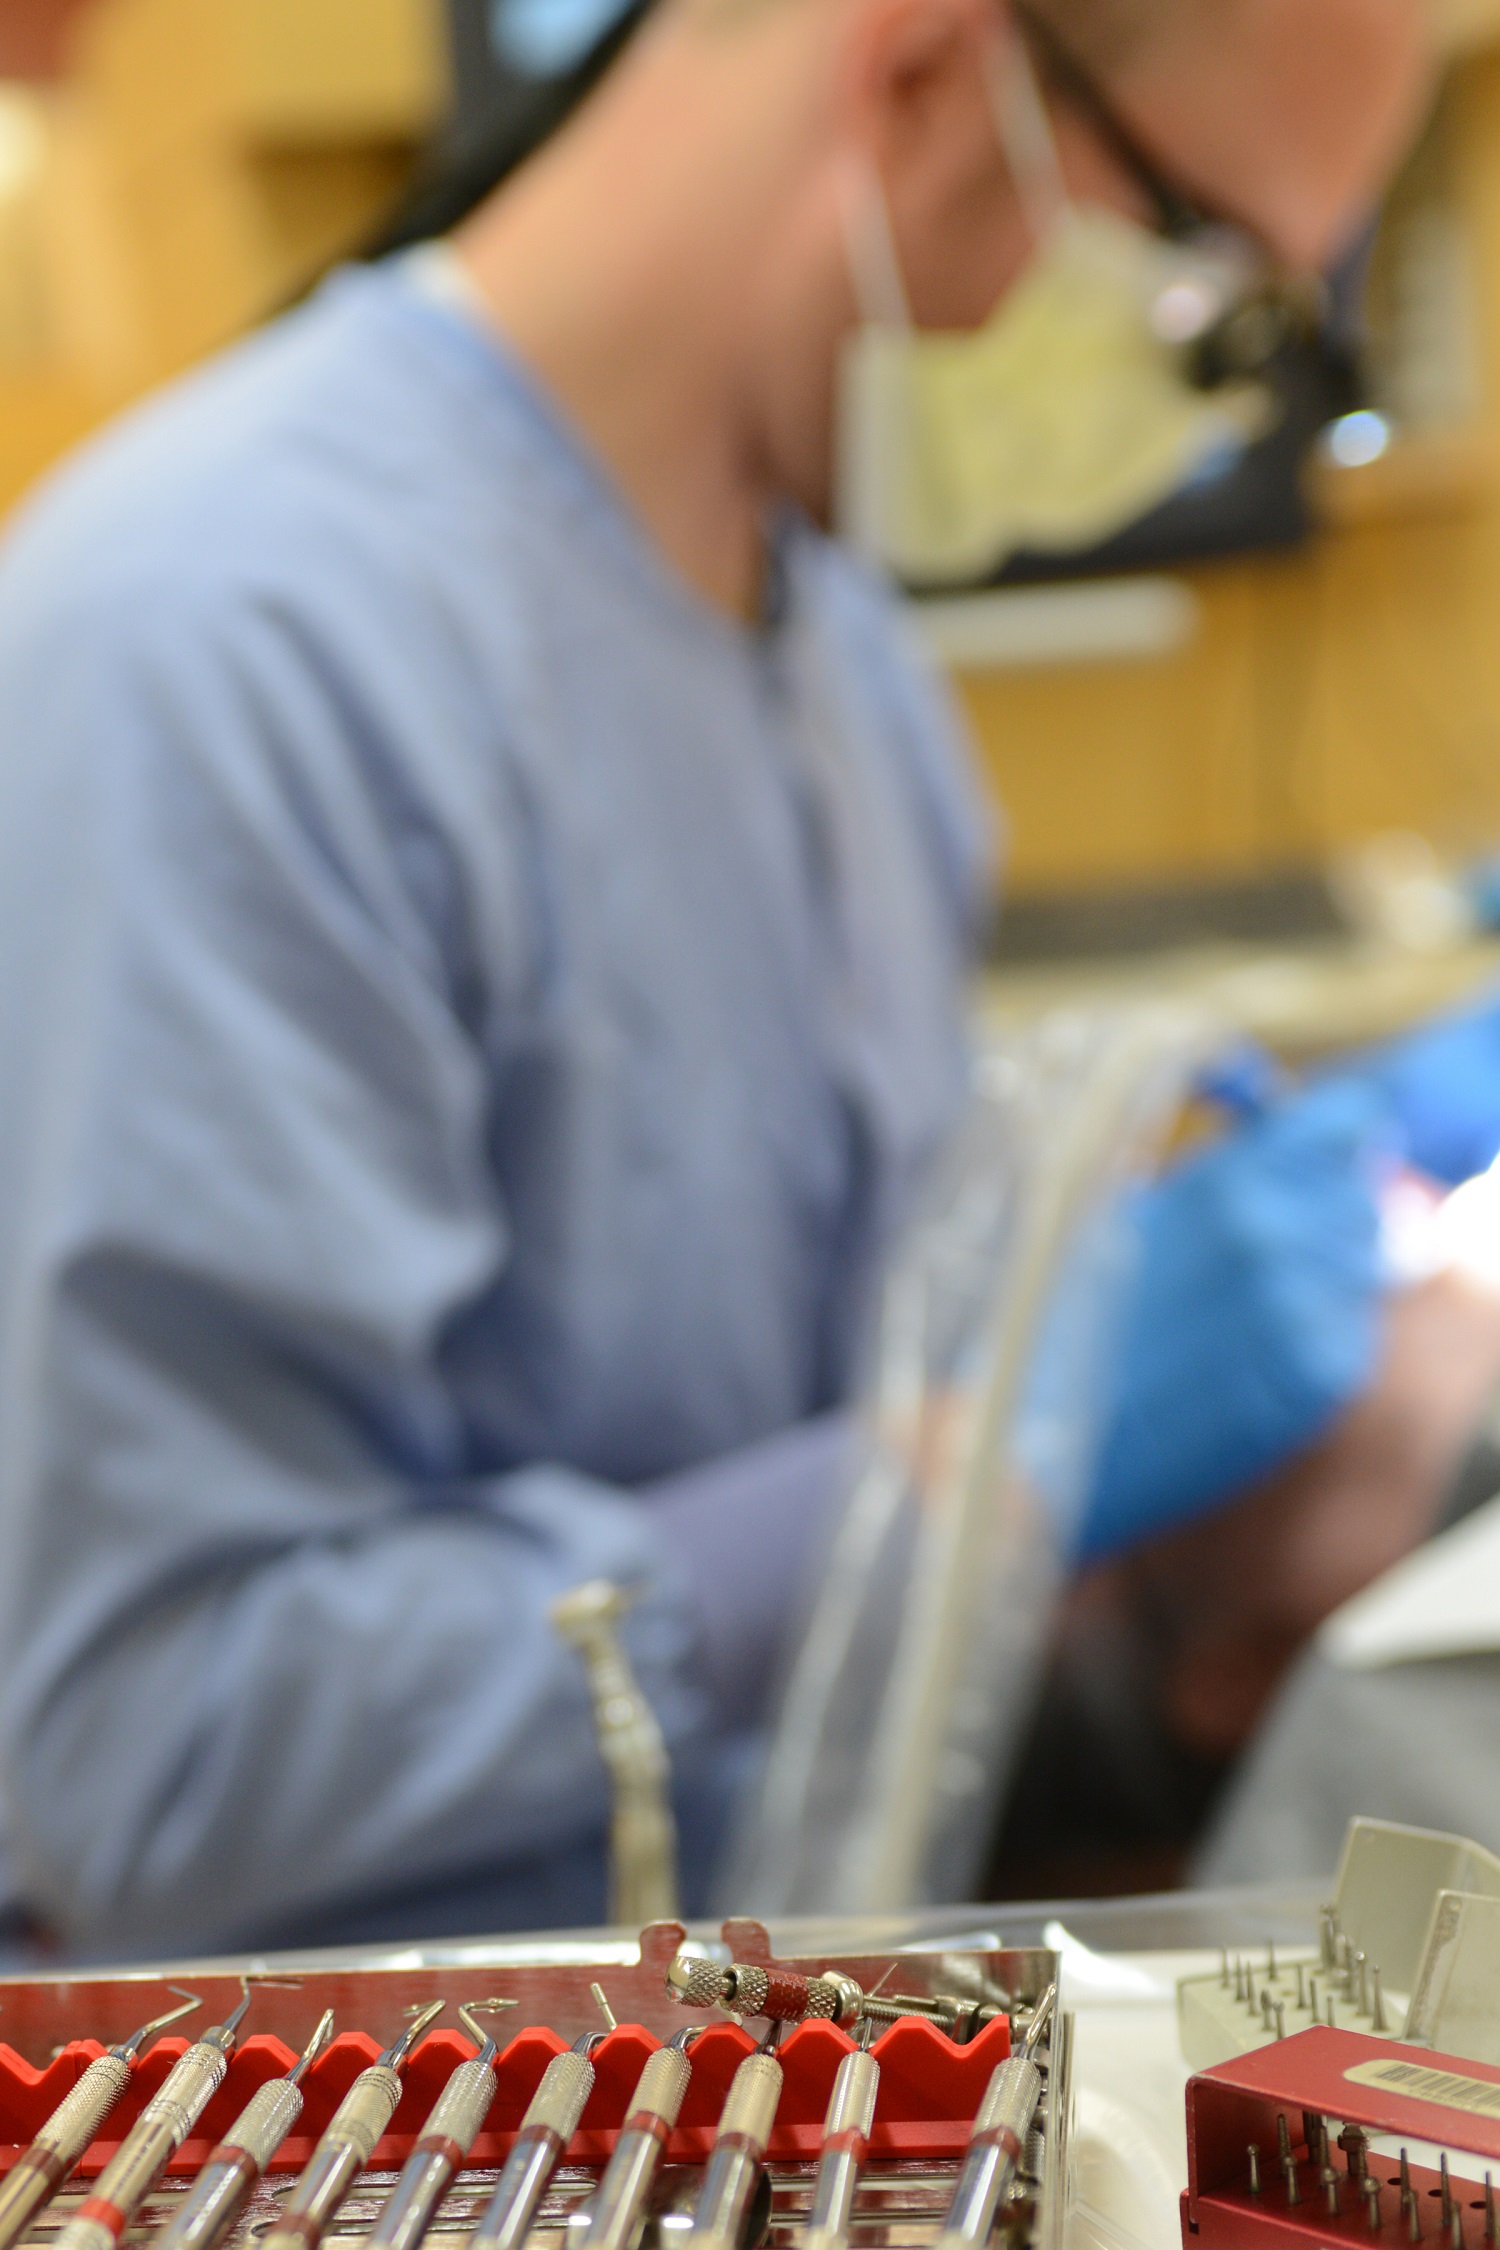 UofL provides comprehensive dental care for people living with HIV